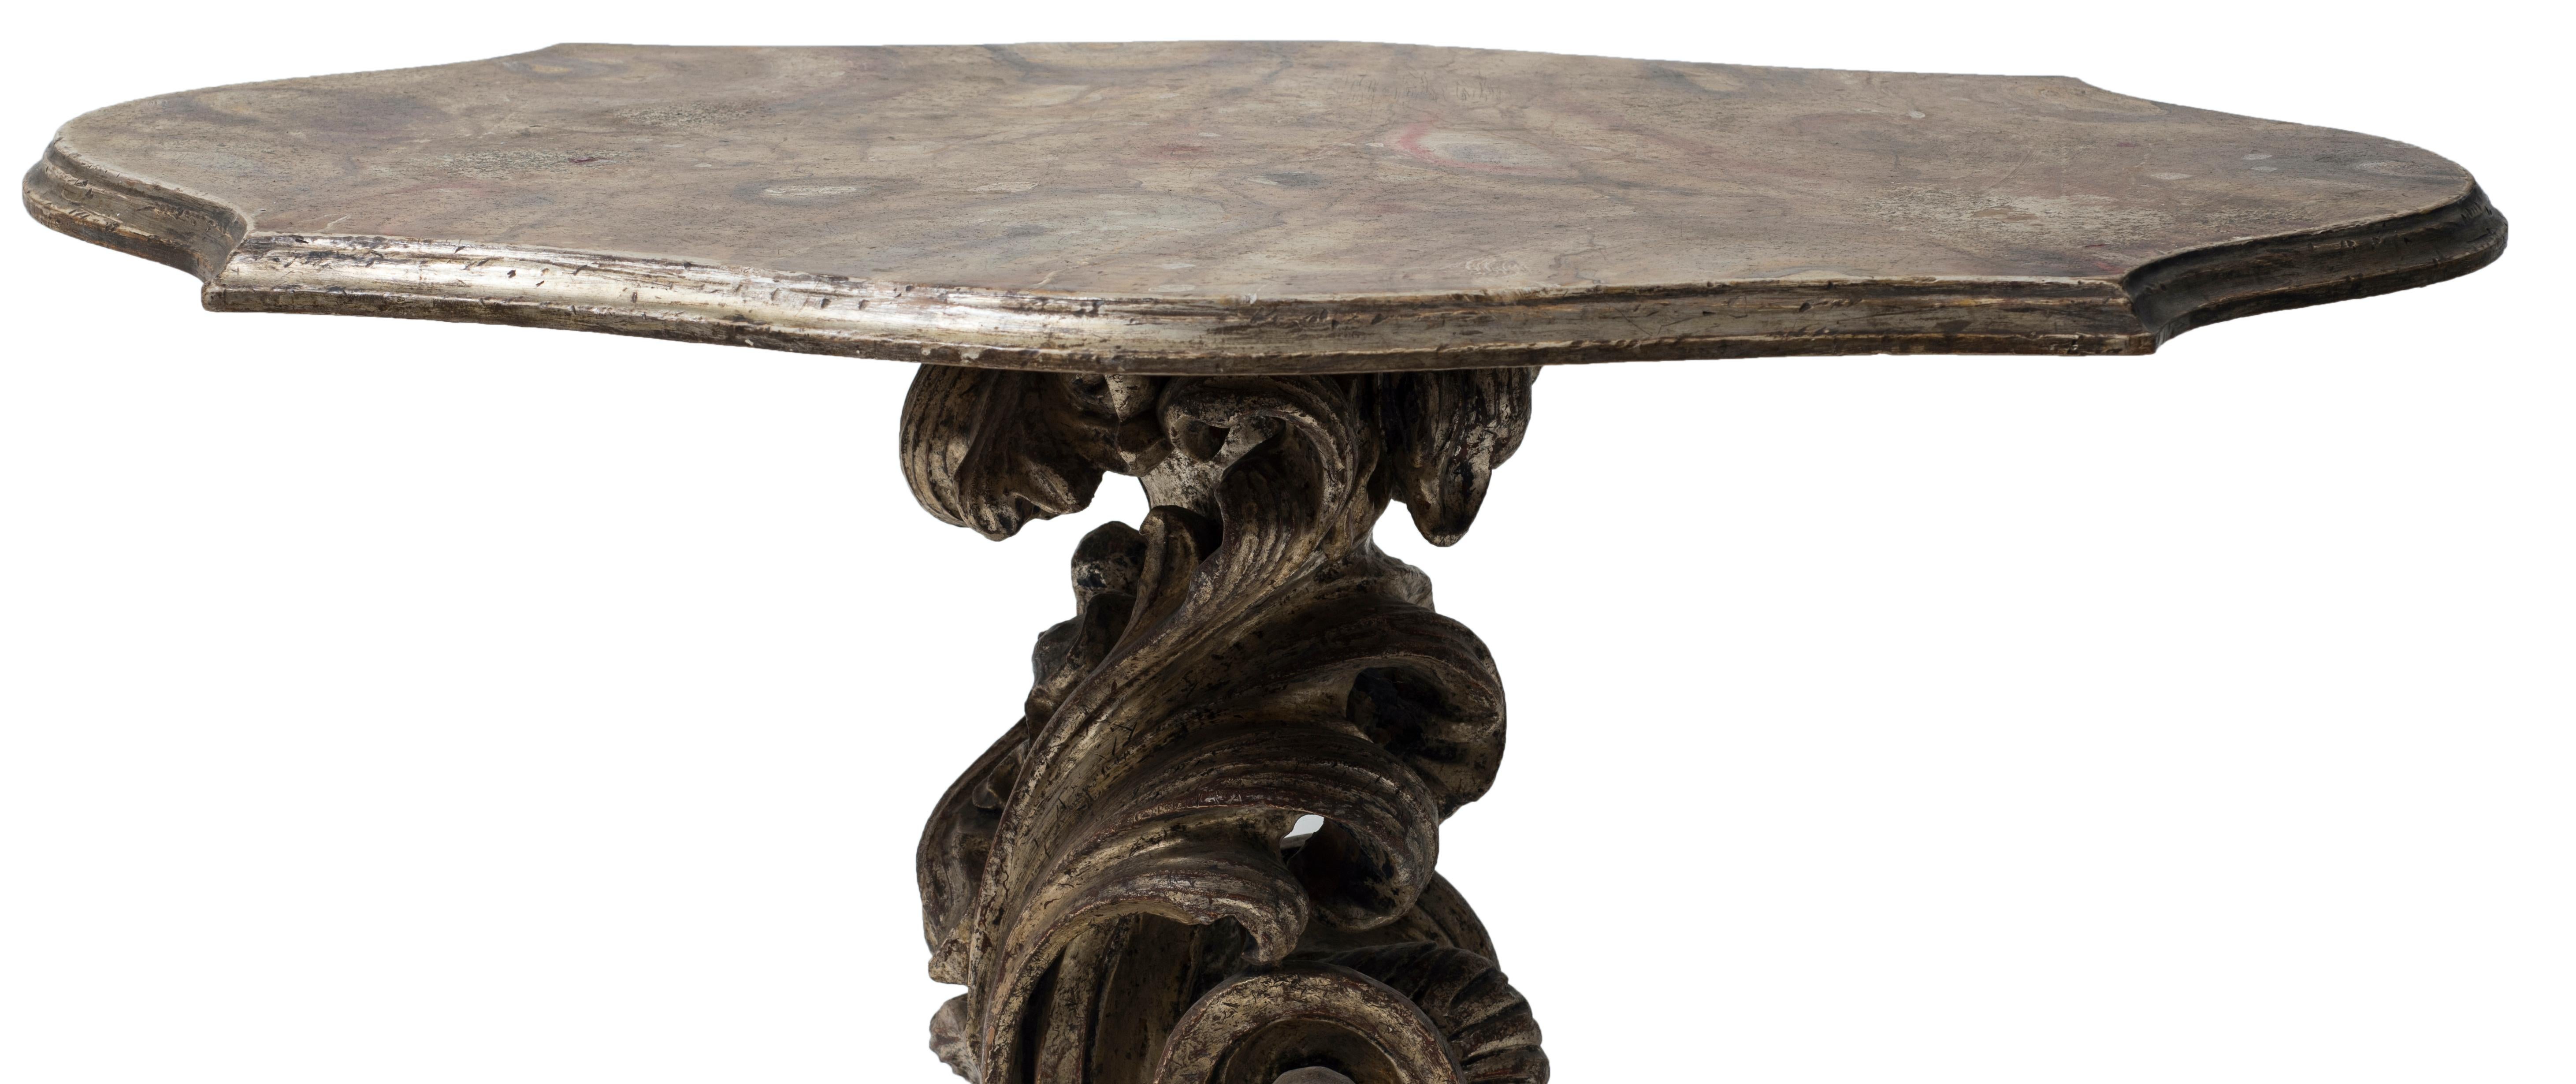 Italian Rococo Style Coffee Wooden Table, Late 18th Century